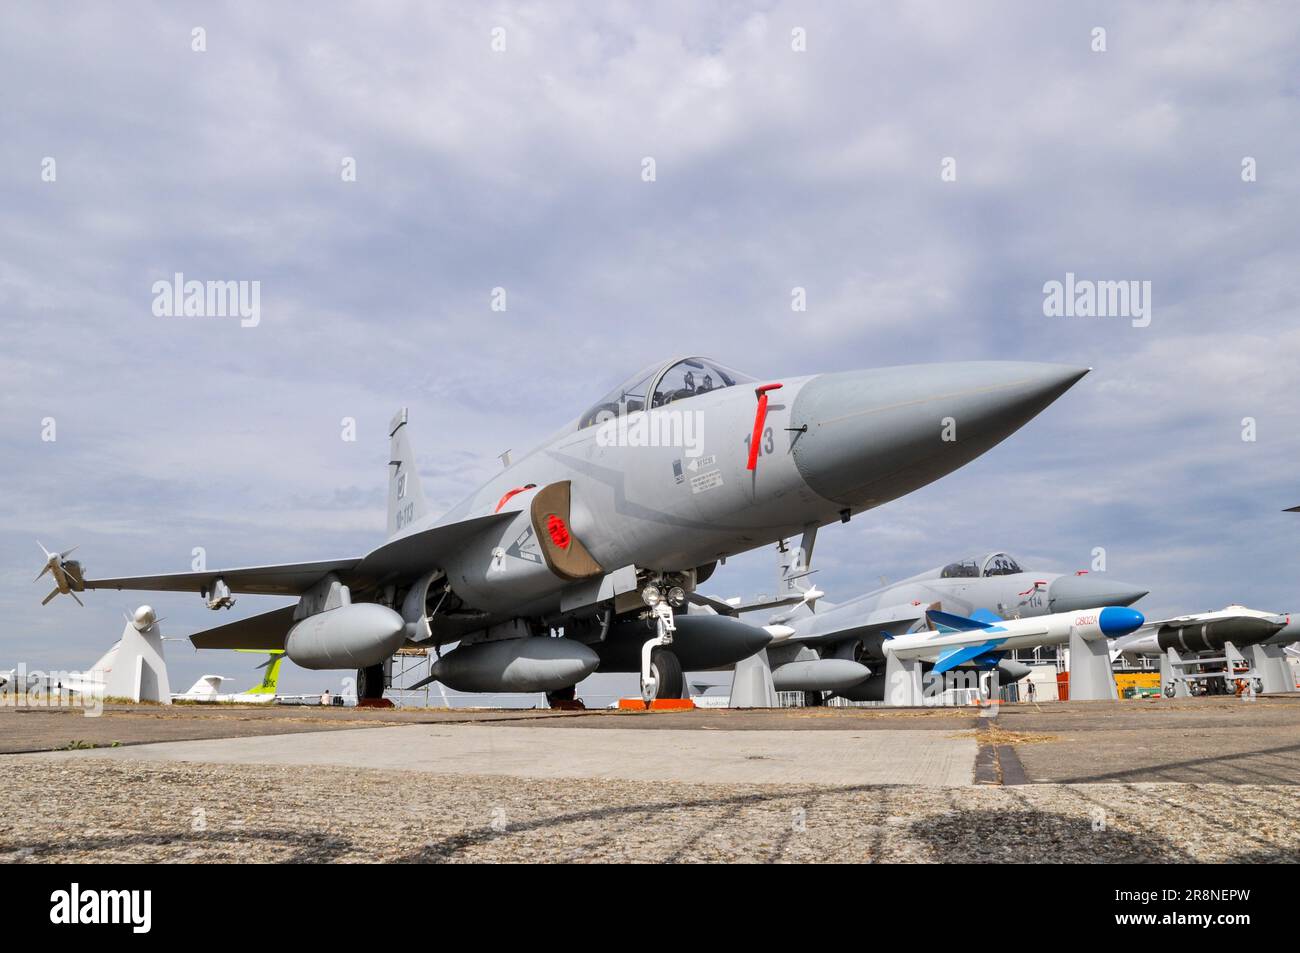 PAC JF-17 Thunder, jet fighter plane by Pakistan Aeronautical Complex (PAC) & China's Chengdu Aircraft Corporation at Farnborough with weapons display Stock Photo